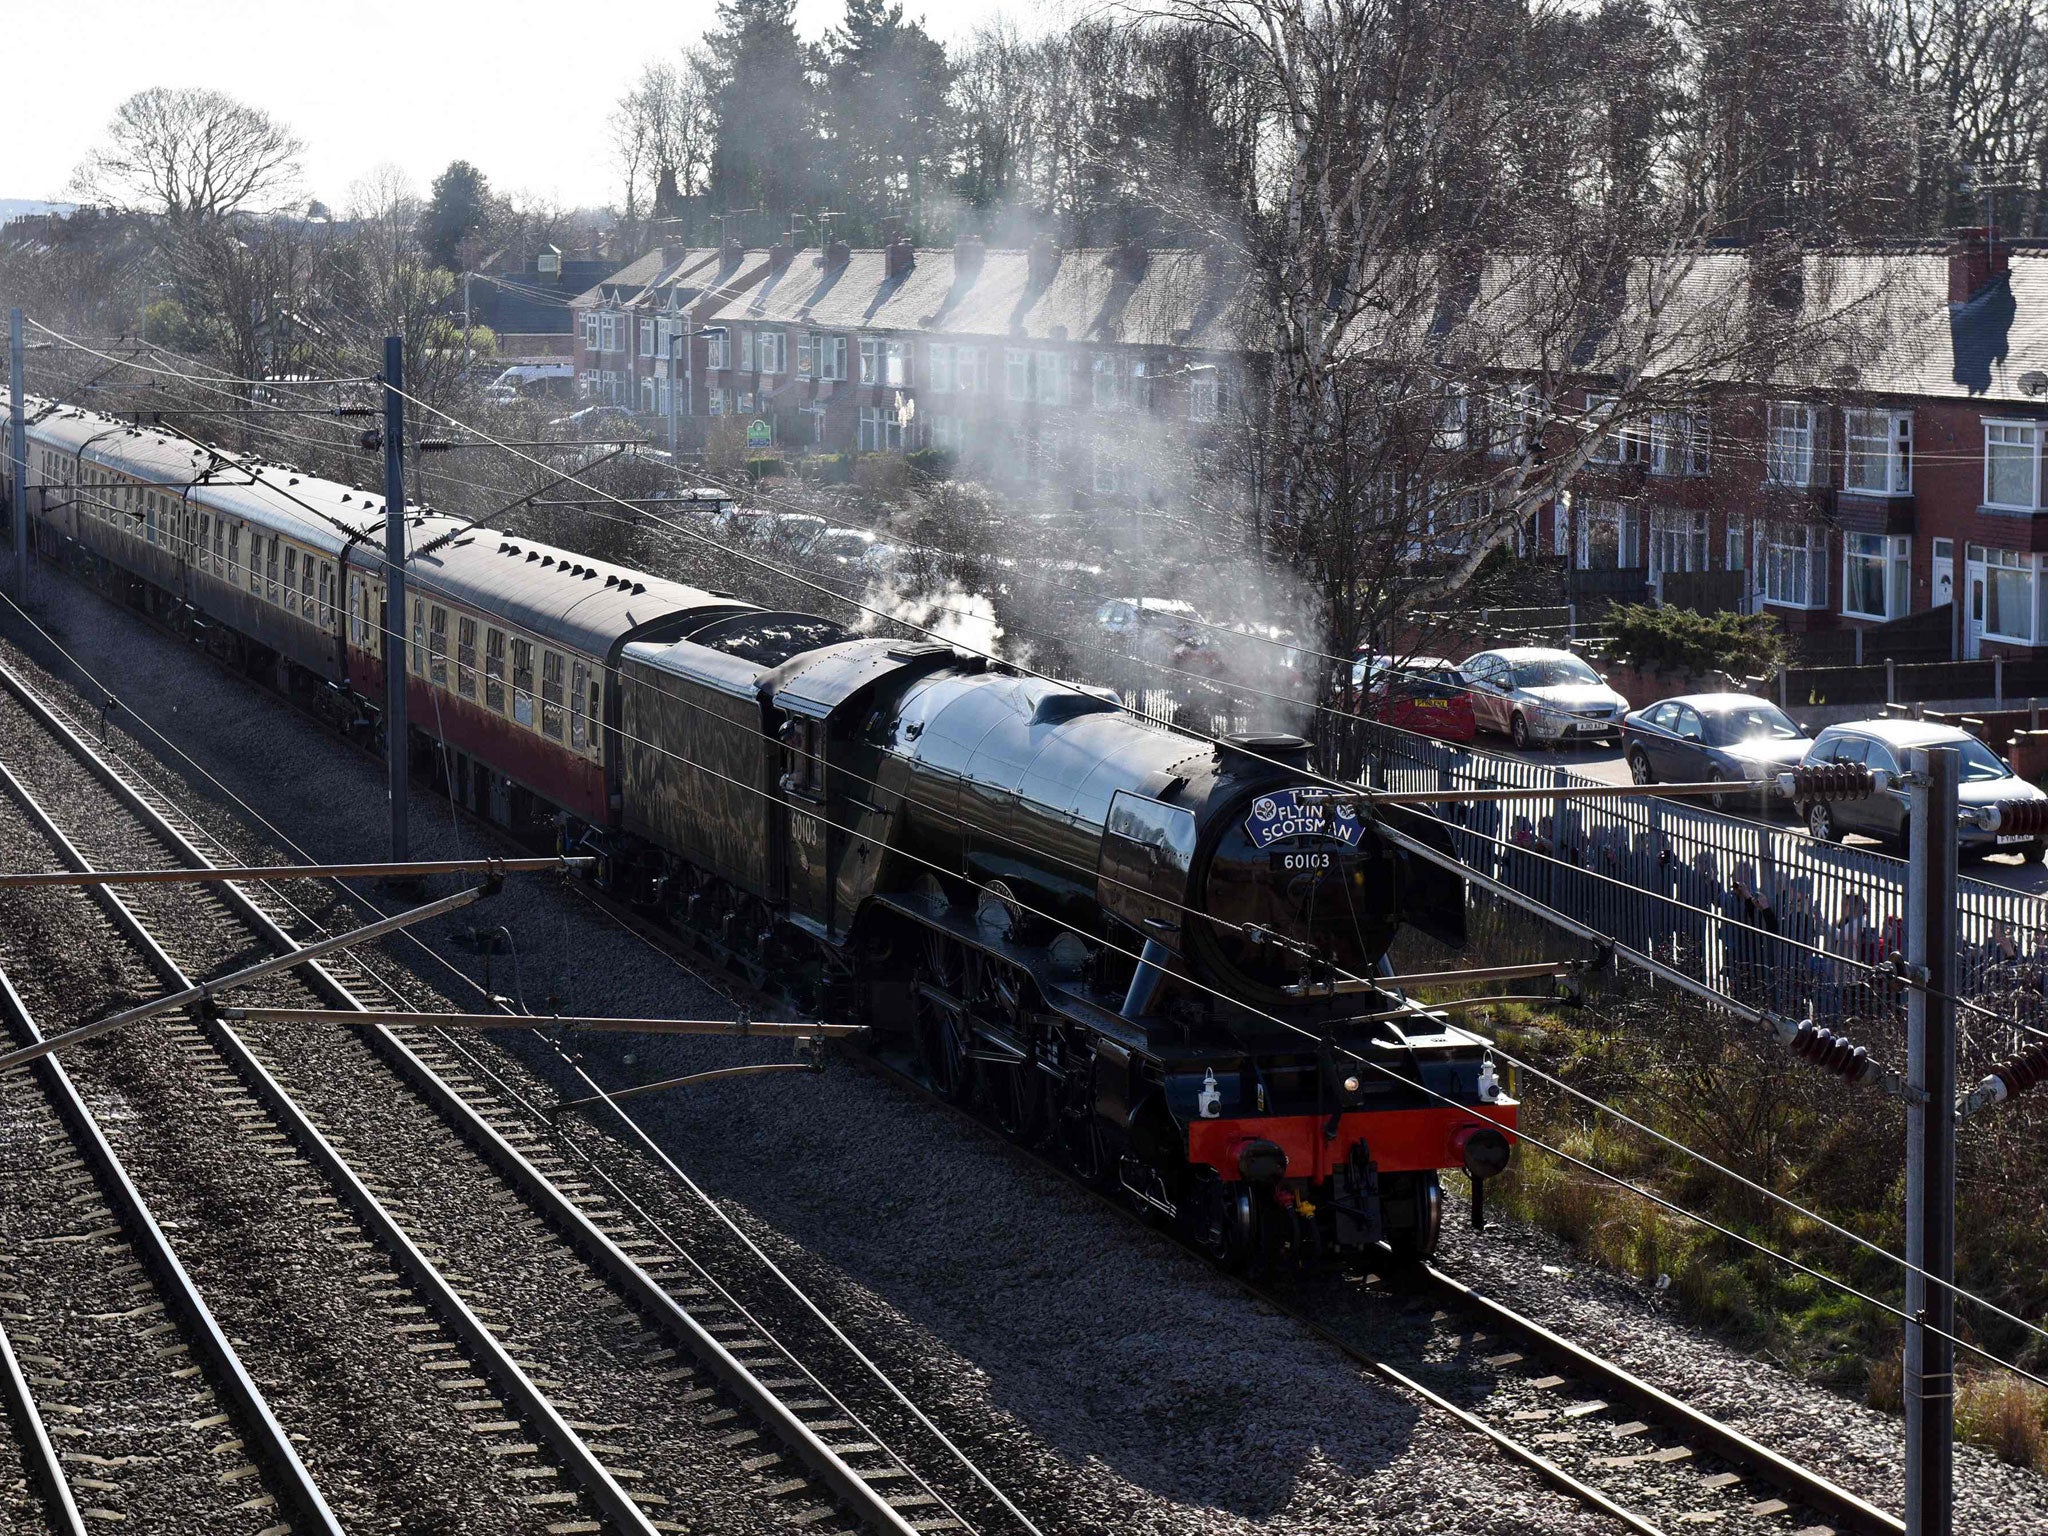 Flying Scotsman soon became the star of the British railway system after being built in 1923